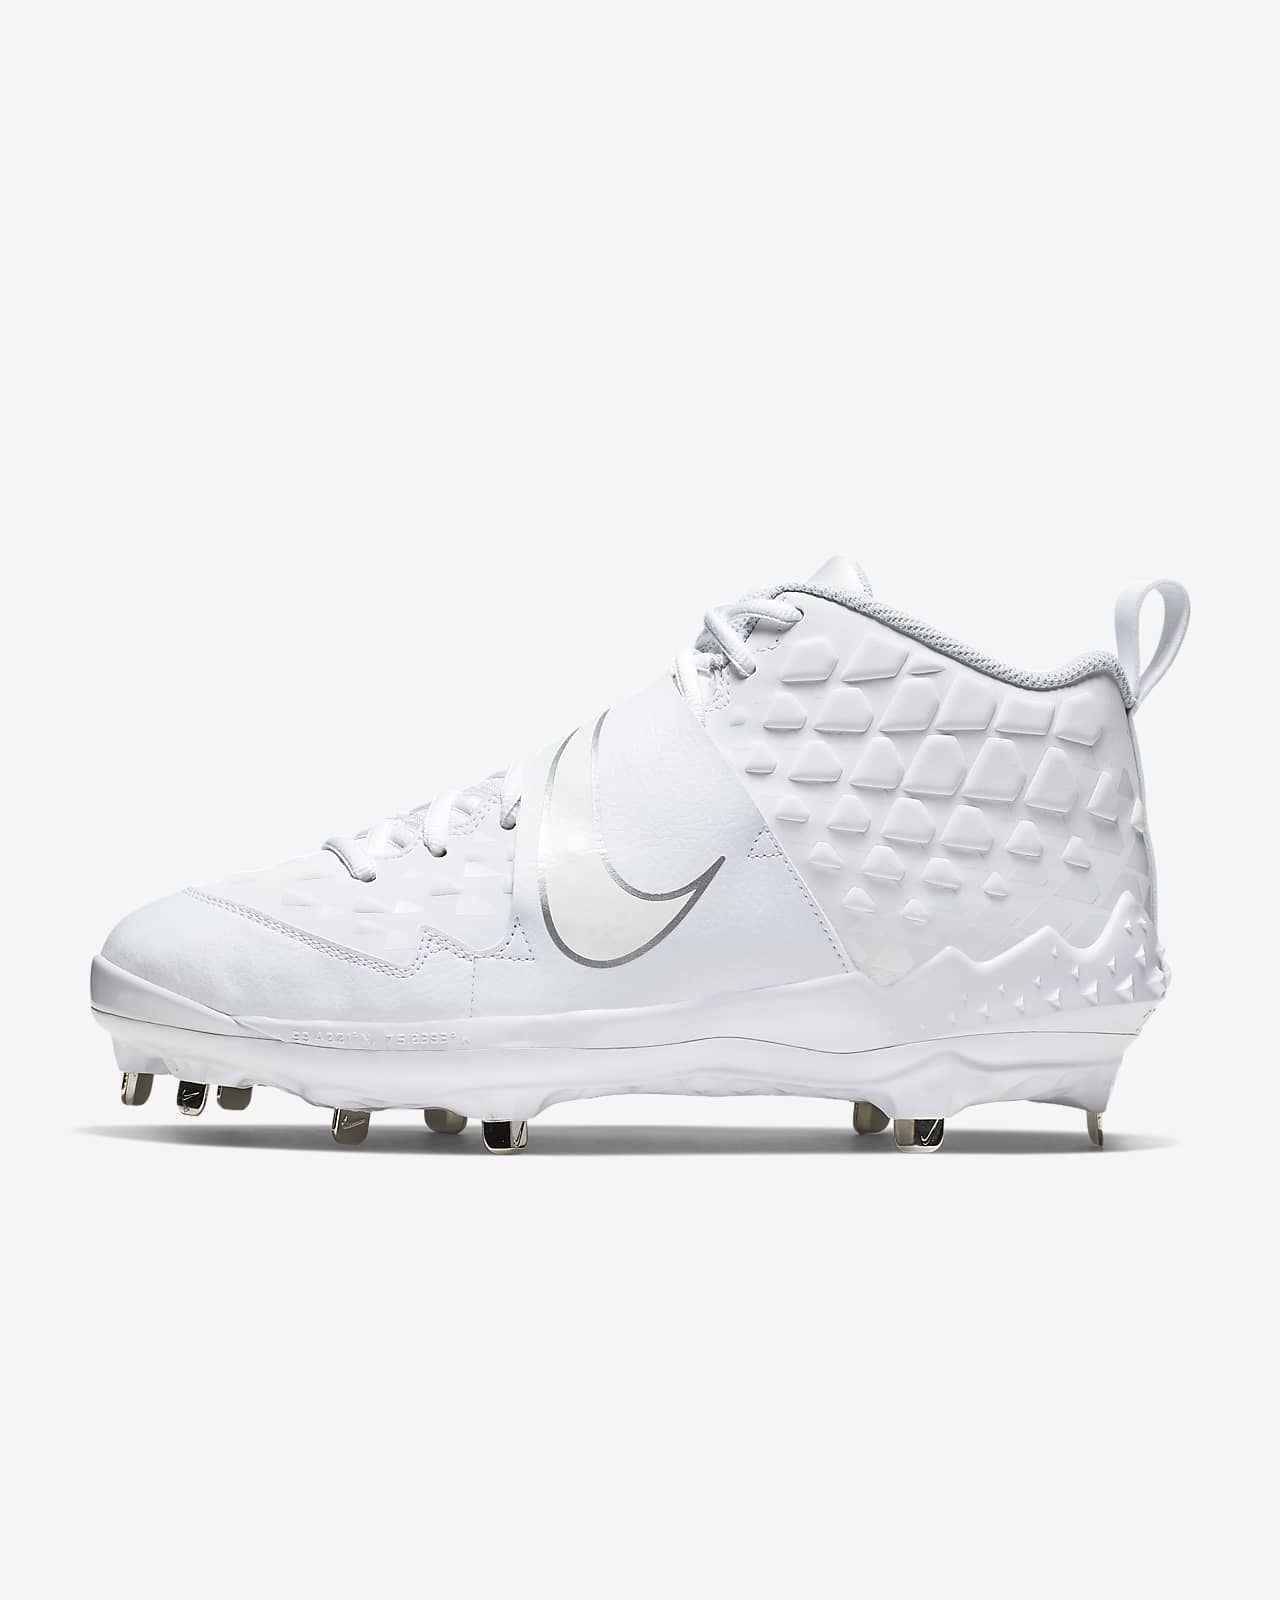 mike trout baseball cleats